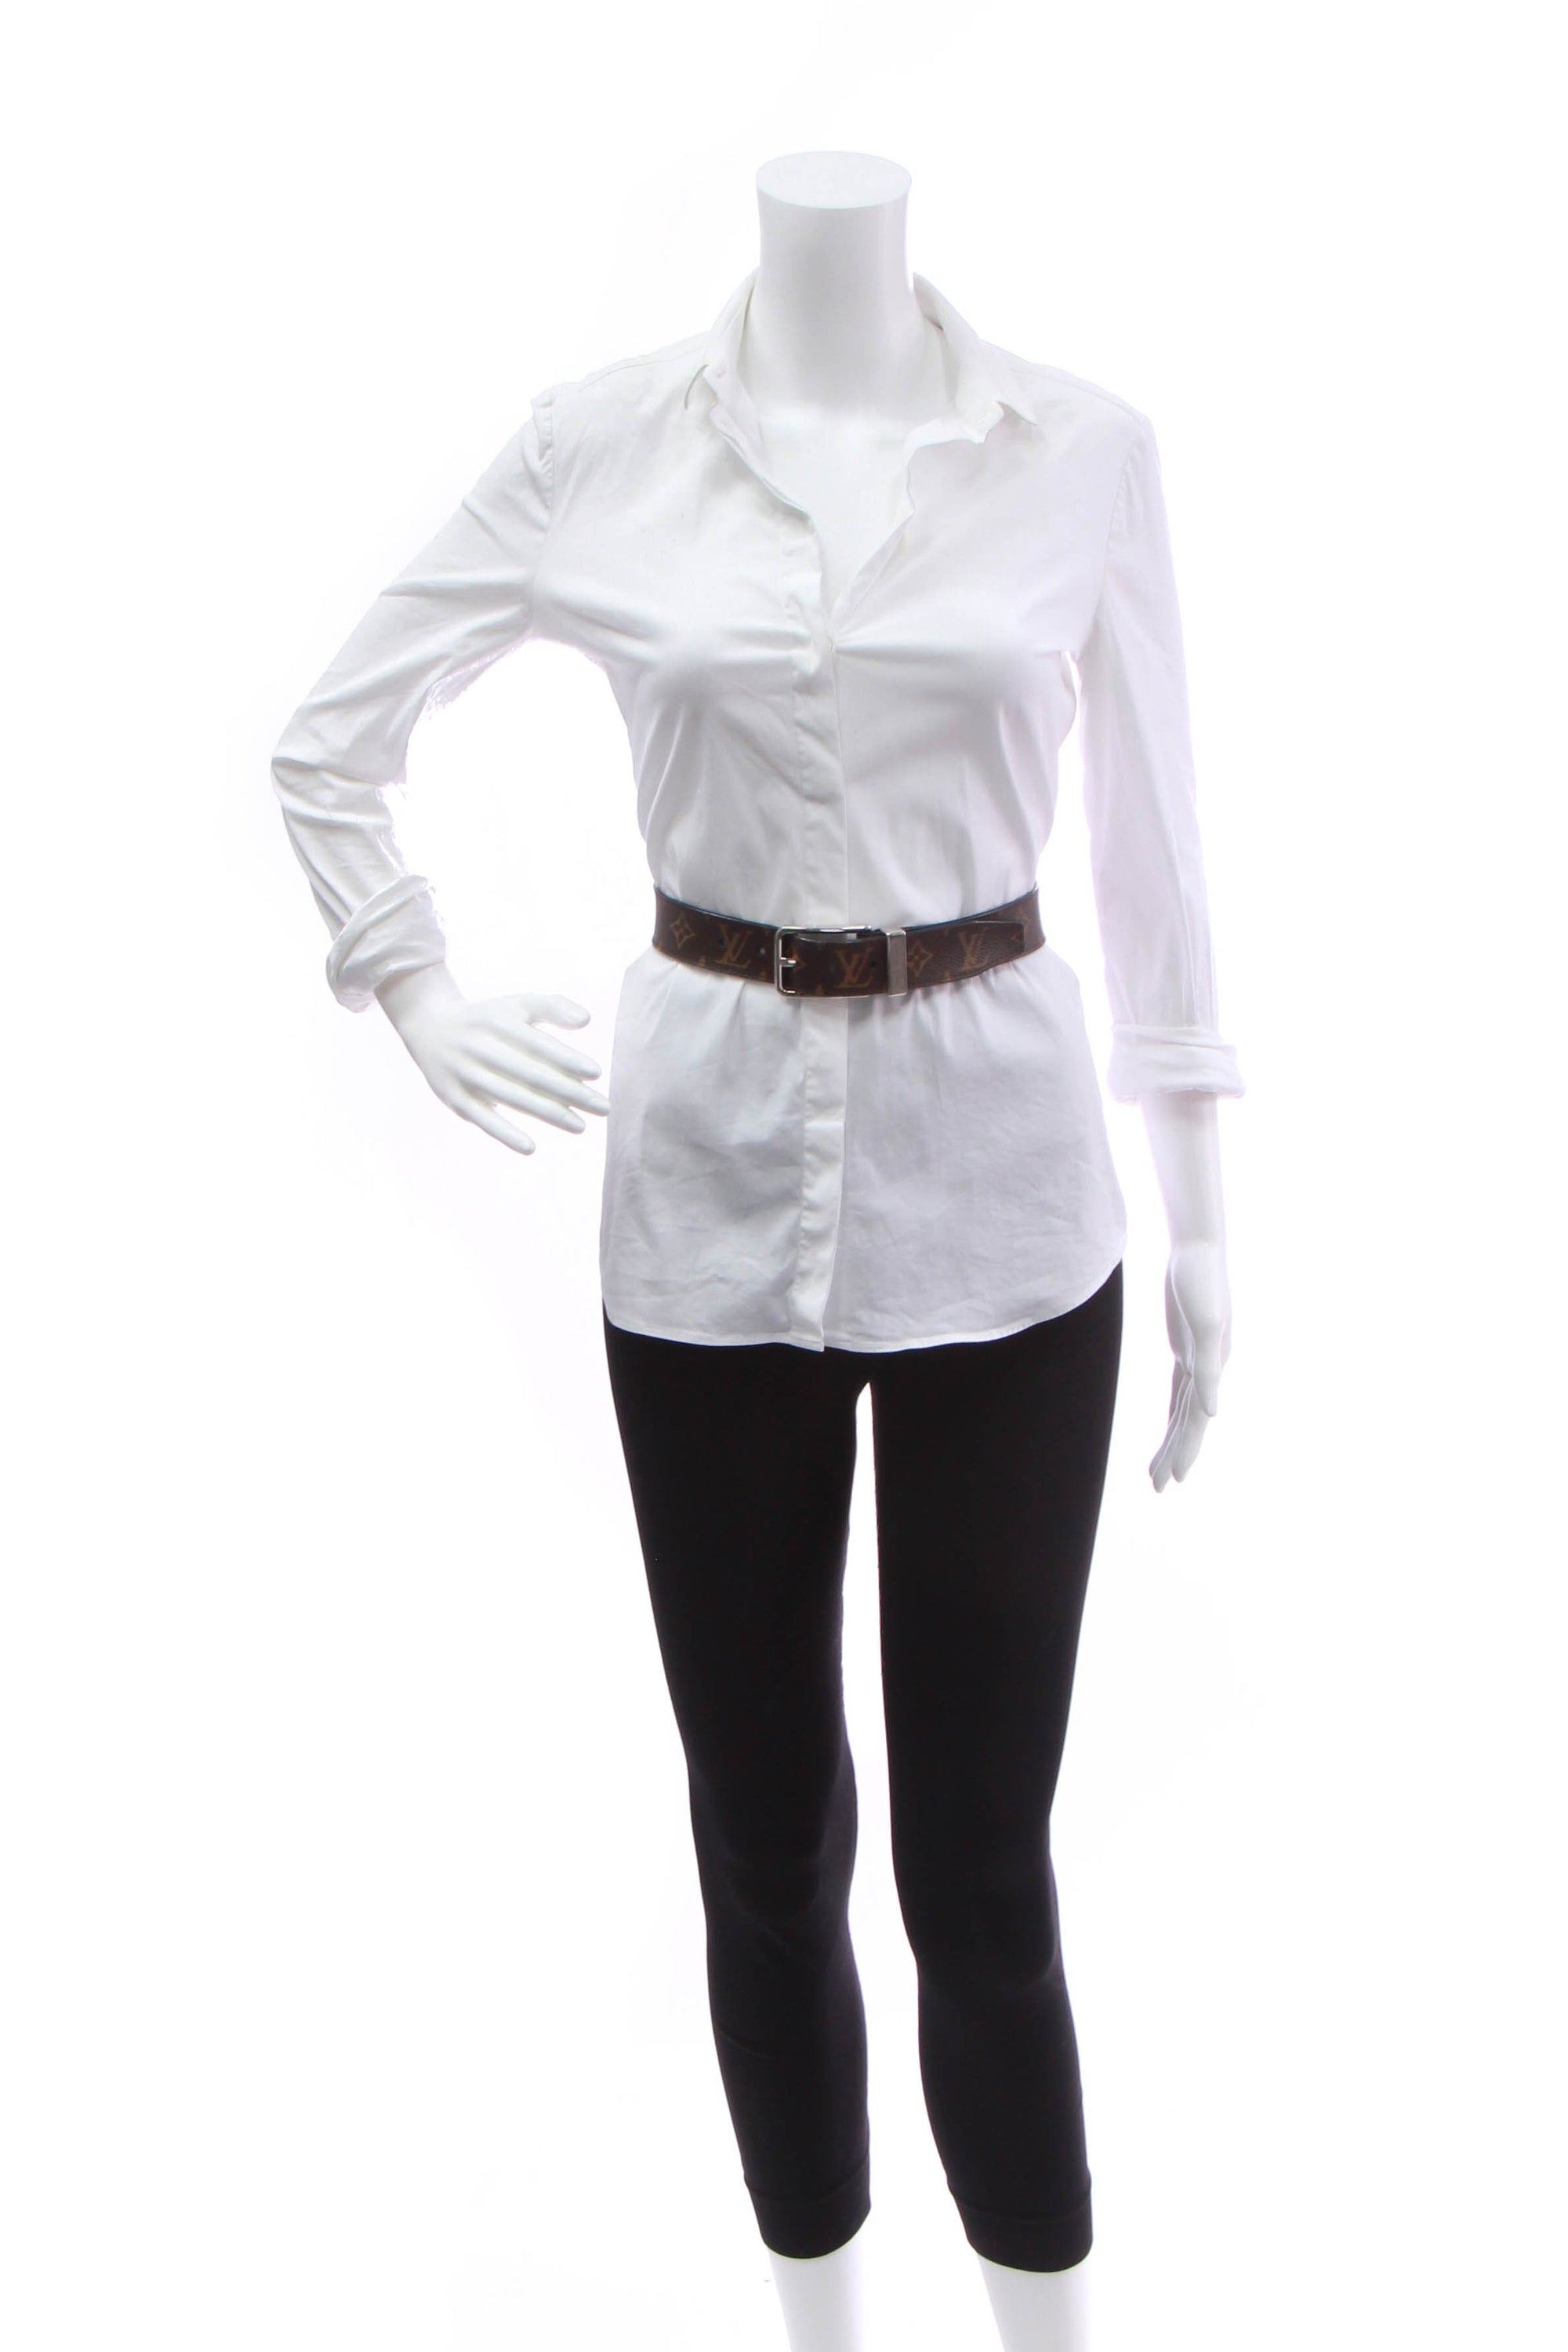 Louis Vuitton White Long Sleeve Shirt Luxembourg, SAVE 46% 